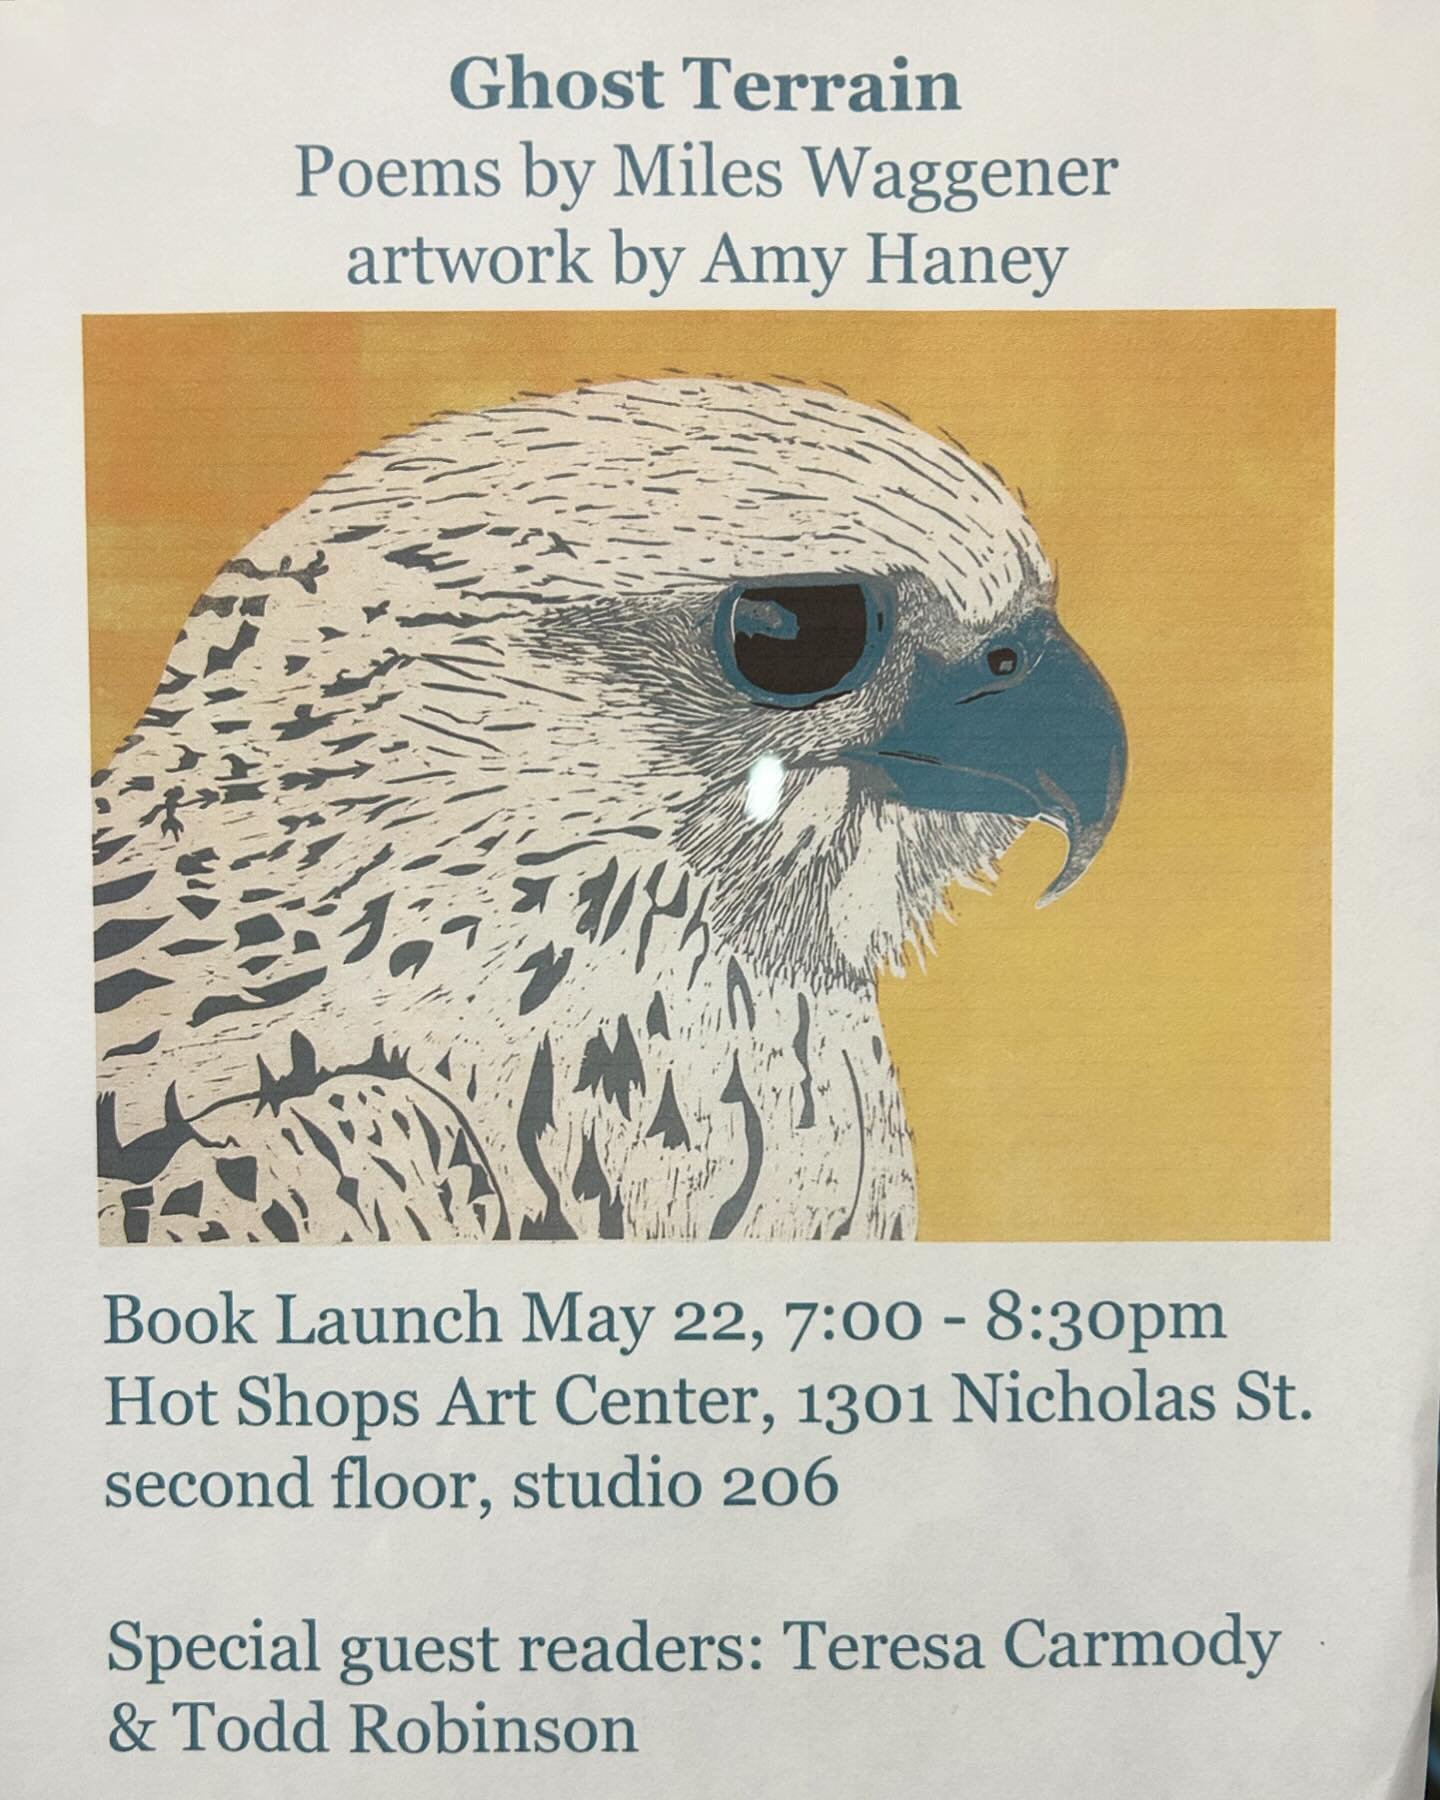 Most of us need more poetry and art. Hope you&rsquo;ll join us next week at @hotshopsartcenter for poems by Miles Waggener, @_toddfather666 and @troseistrose and woodcuts by @amyehaney 

#poetry #omahapoets #nebraskapoetry #nebraskapoets #idontknowth